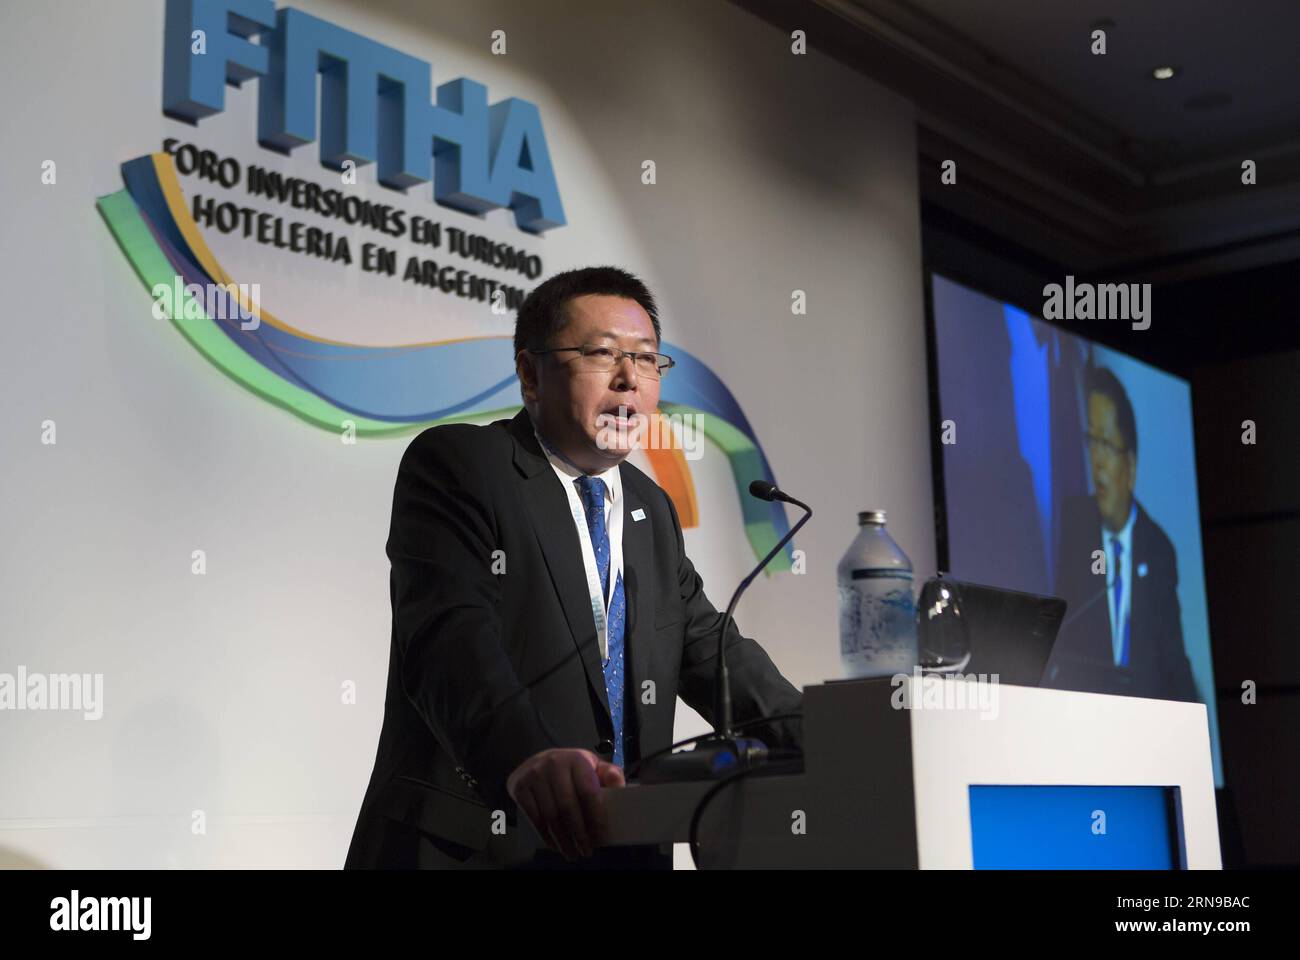 General Deputy Director of Project Evaluation Development Bank of China Wu Di delivers a speech during the opening ceremony of the 2nd Forum of Tourism and Hospitality Investments of Argentina (FITHA, for its acronym in Spanish) in Buenos Aires, Argentina, on Nov. 26, 2015. The Chinese Ambassador to Argentina Yang Wanming invited the South American country on Thursday to strengthen bilateral ties in tourism, as a bridge to enhance the exchange and mutual understanding. ) (vf) (sp) ARGENTINA-BUENOS AIRES-CHINA-INDUSTRY-FITHA MARTINxZABALA PUBLICATIONxNOTxINxCHN   General Deputy Director of Proj Stock Photo